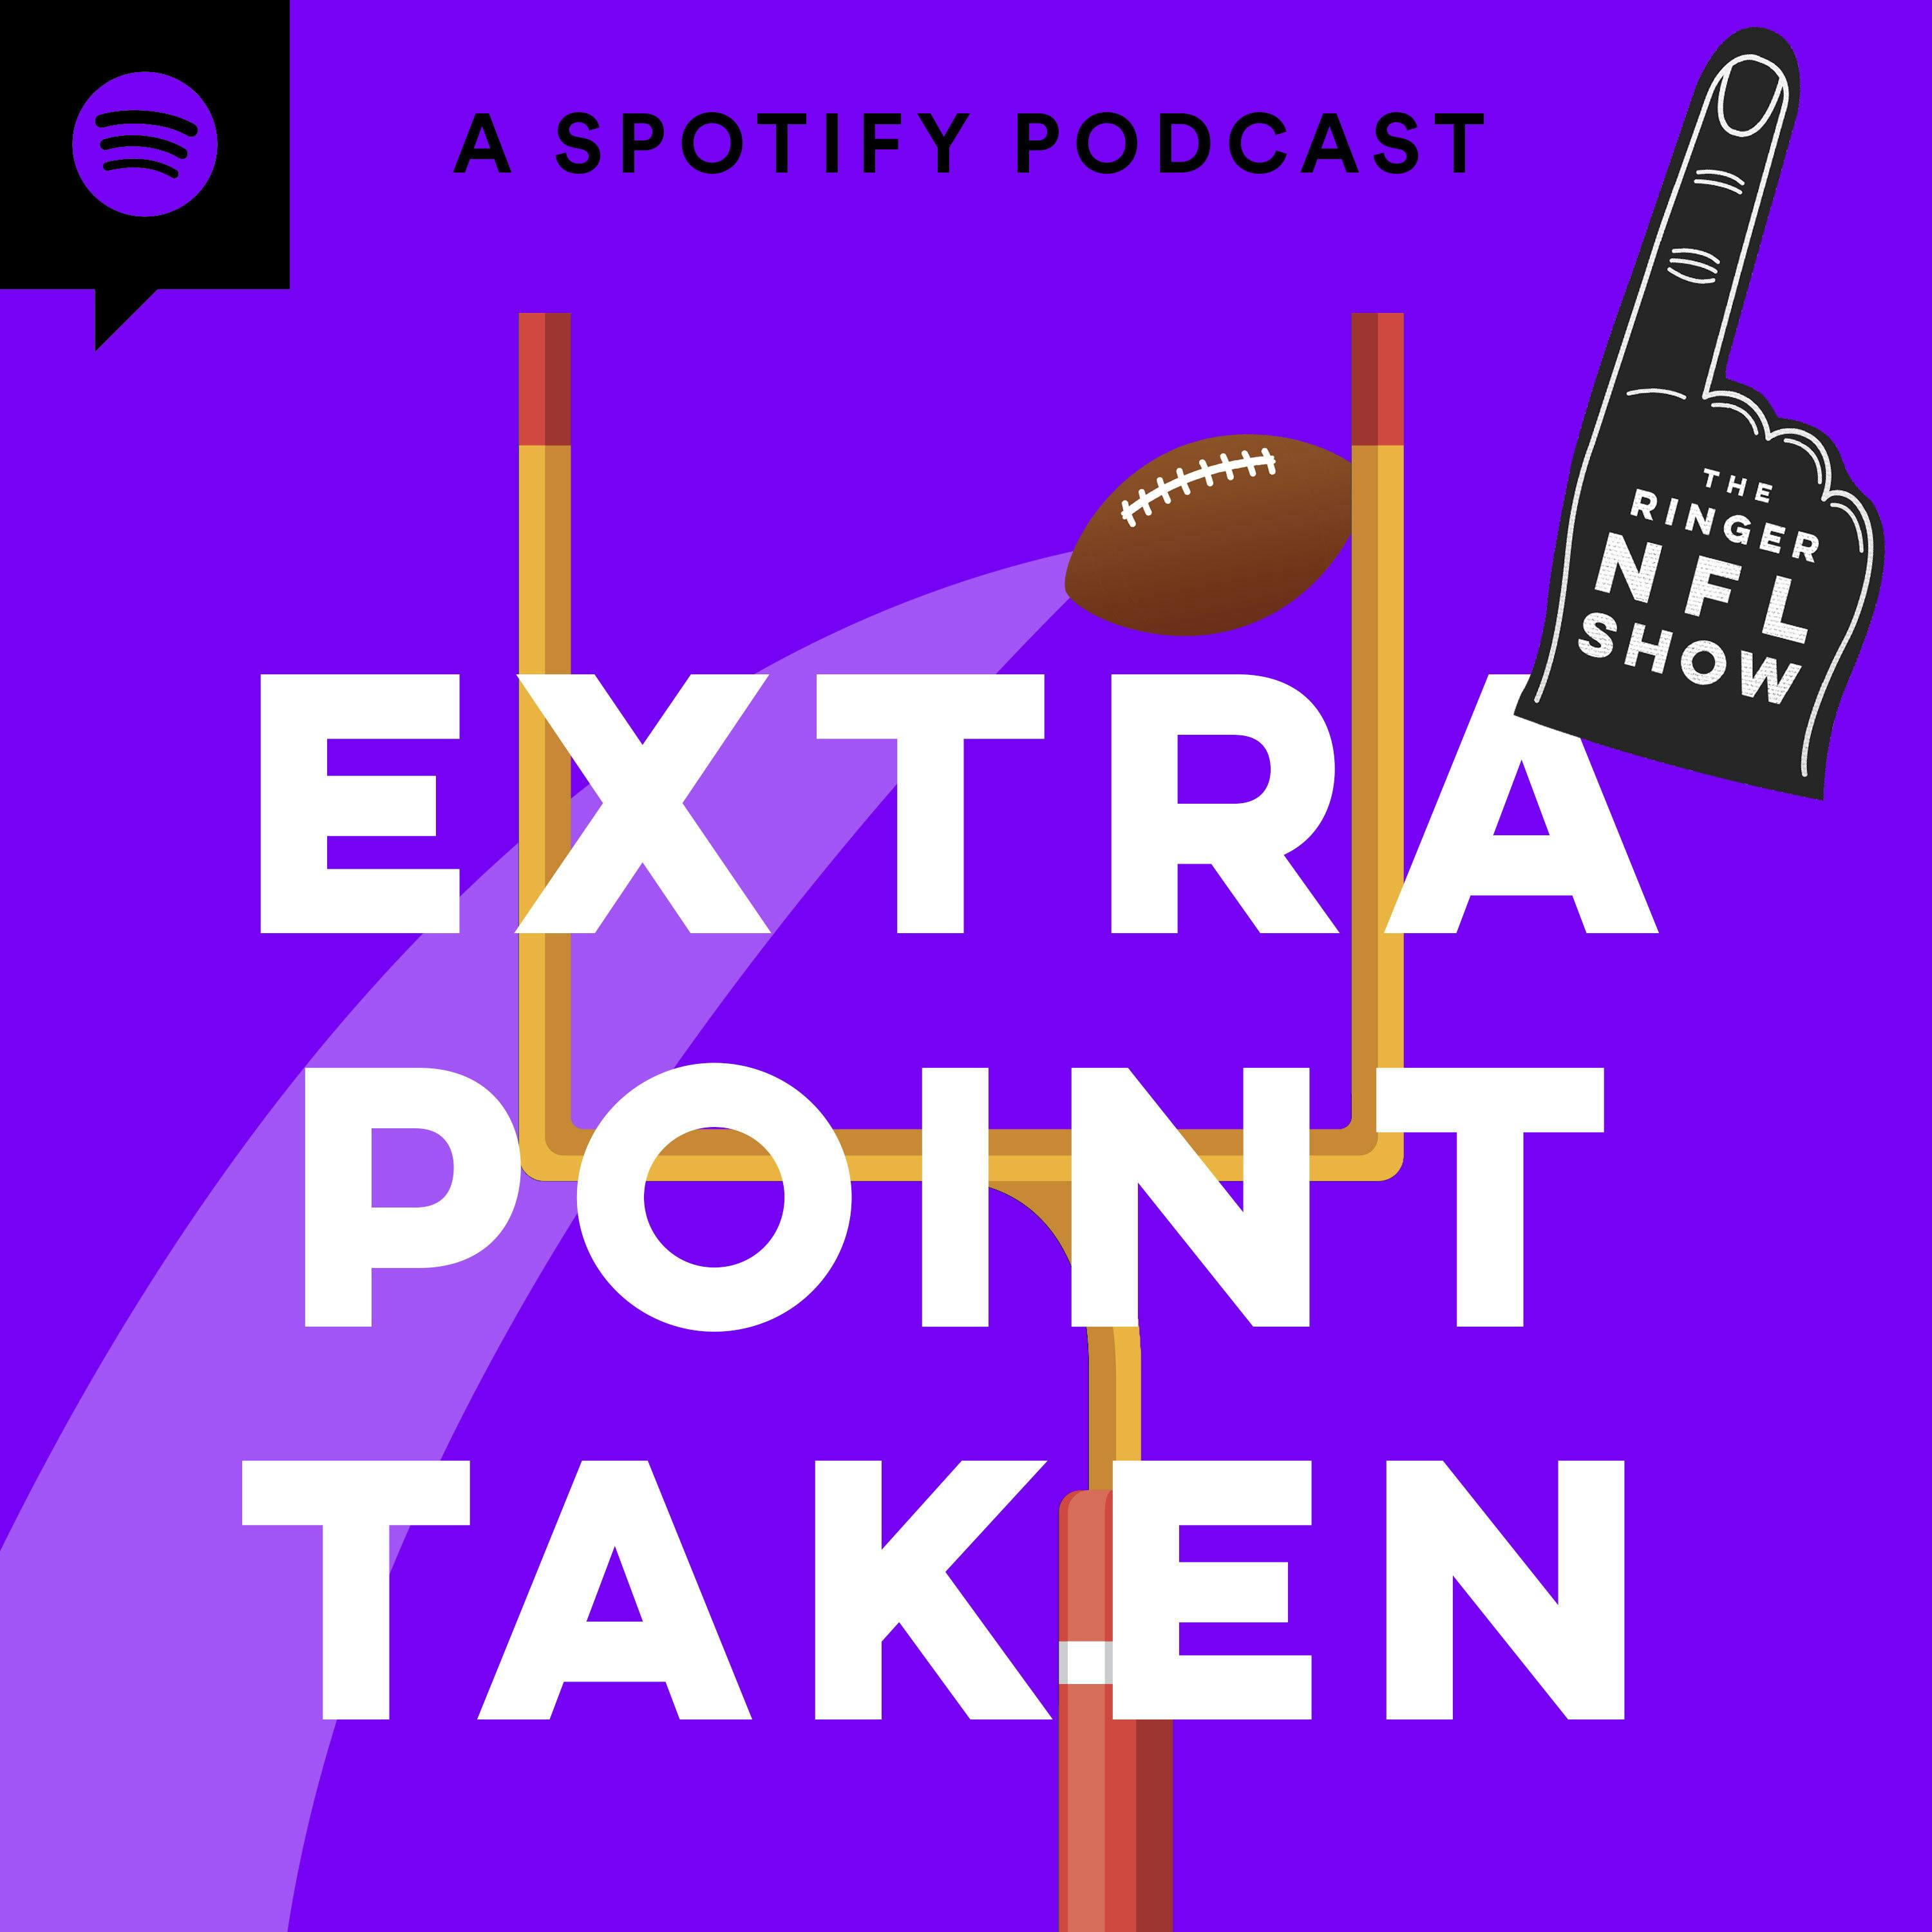 NFL Week 15 Picks, Props, and Predictions! | Extra Point Taken